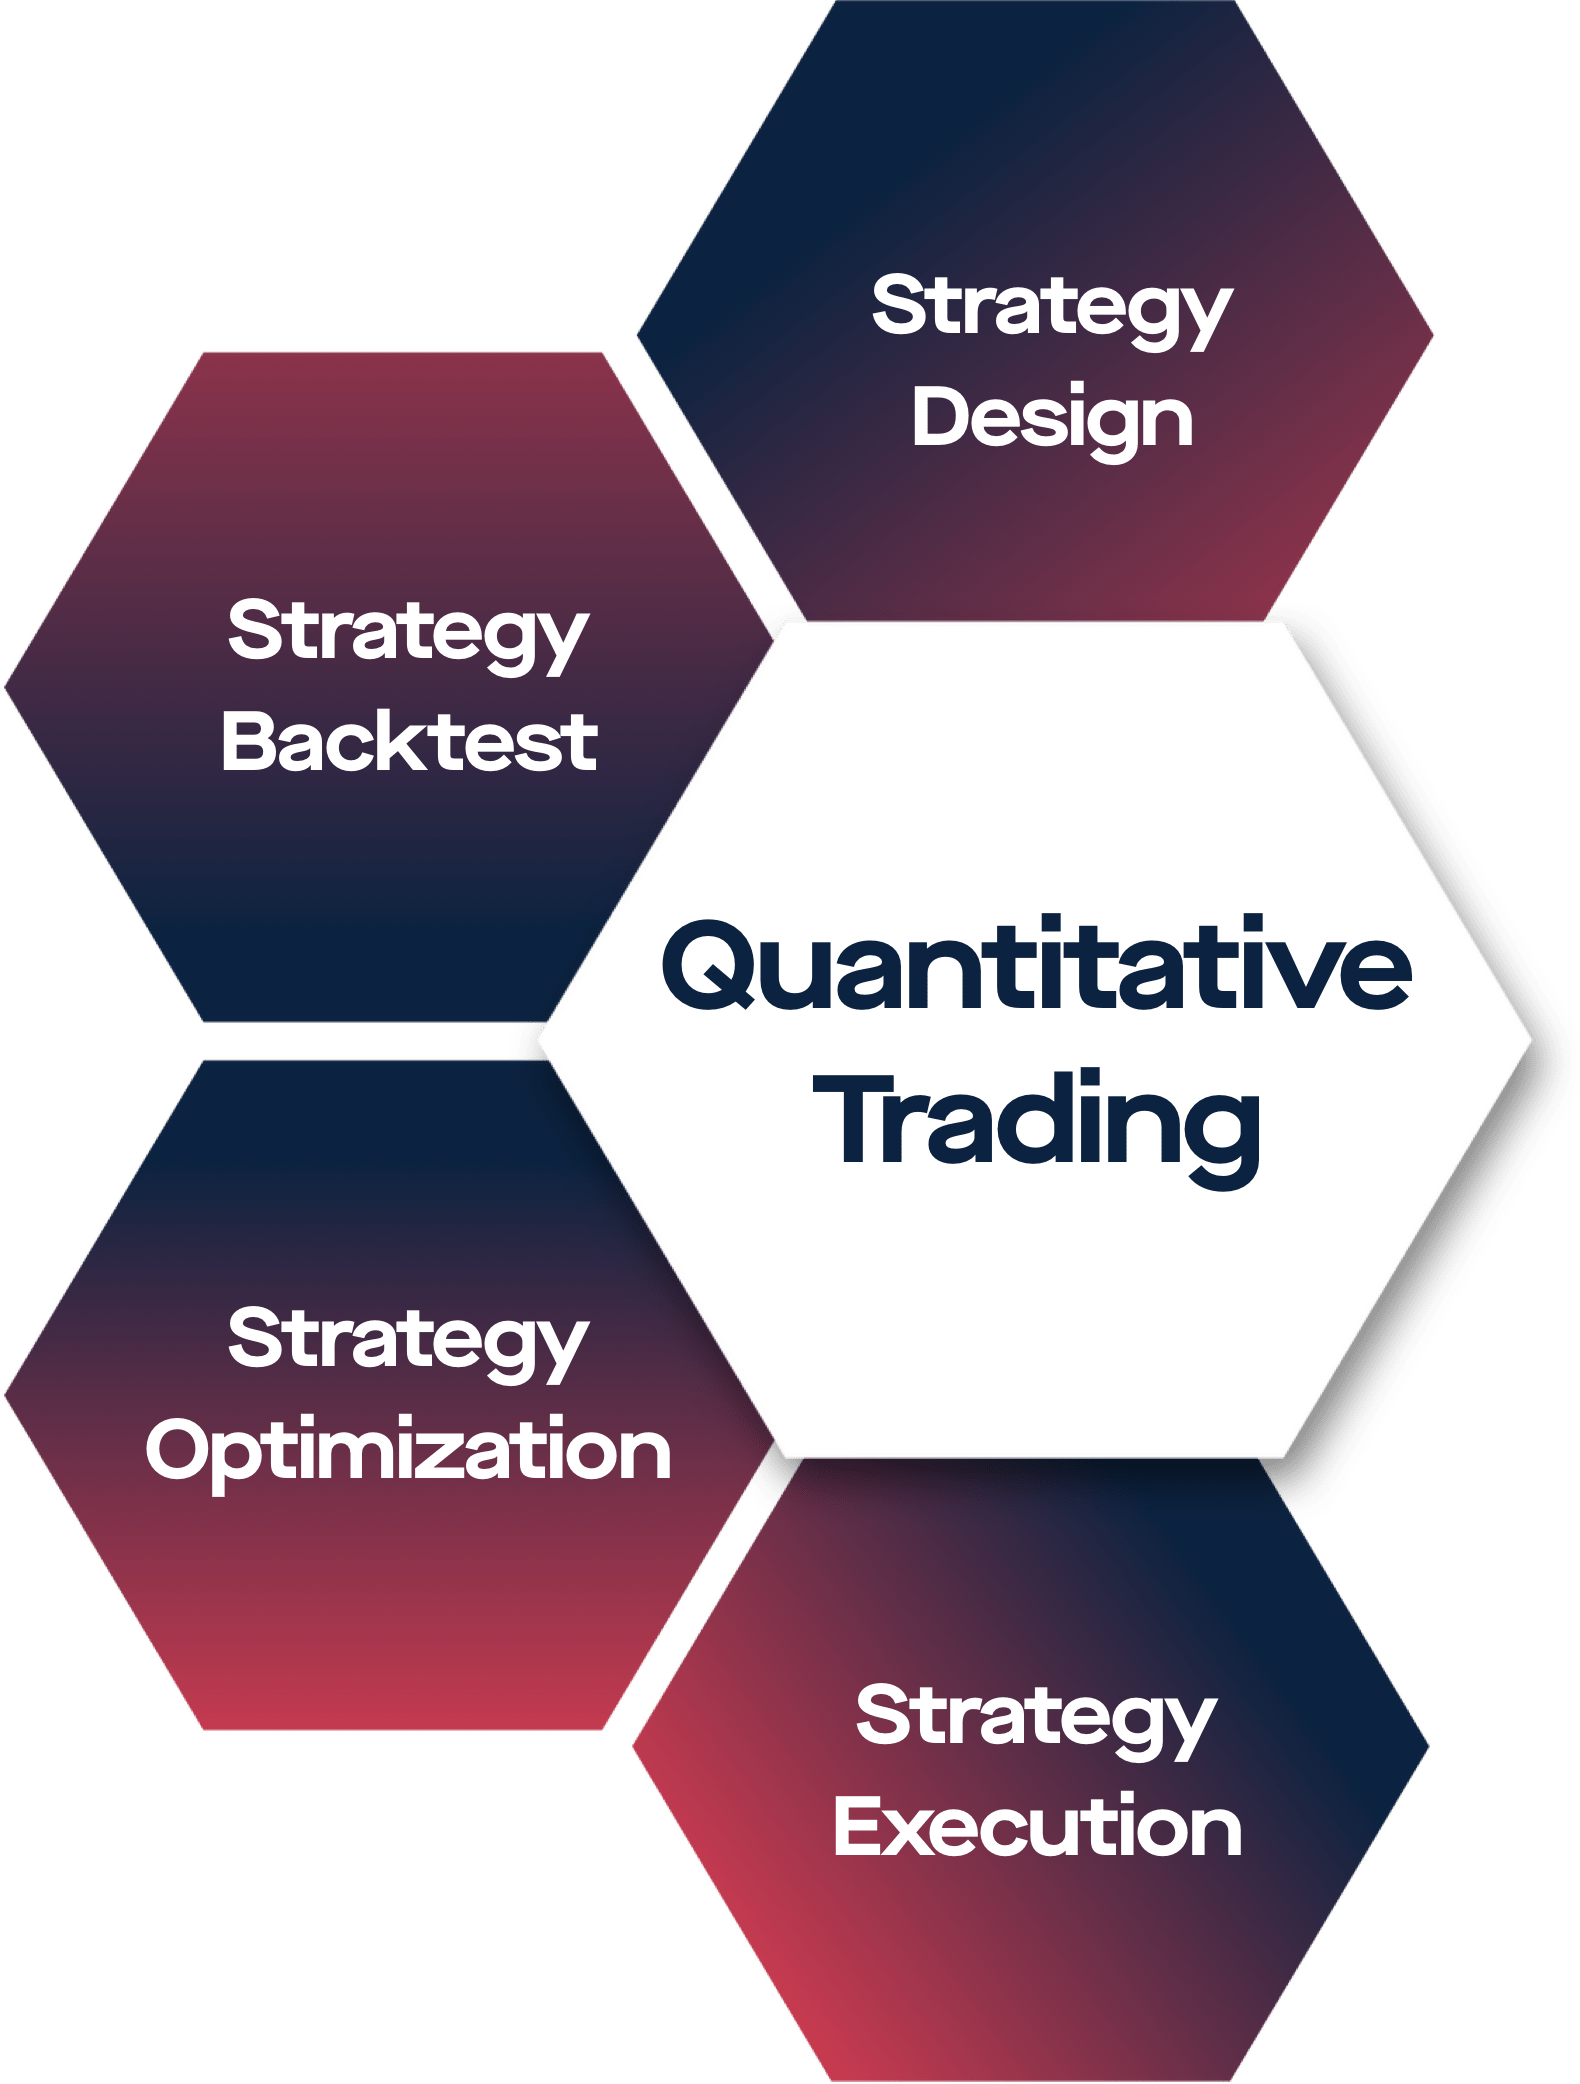 Leading In Global Quant Trading - Quant Matter